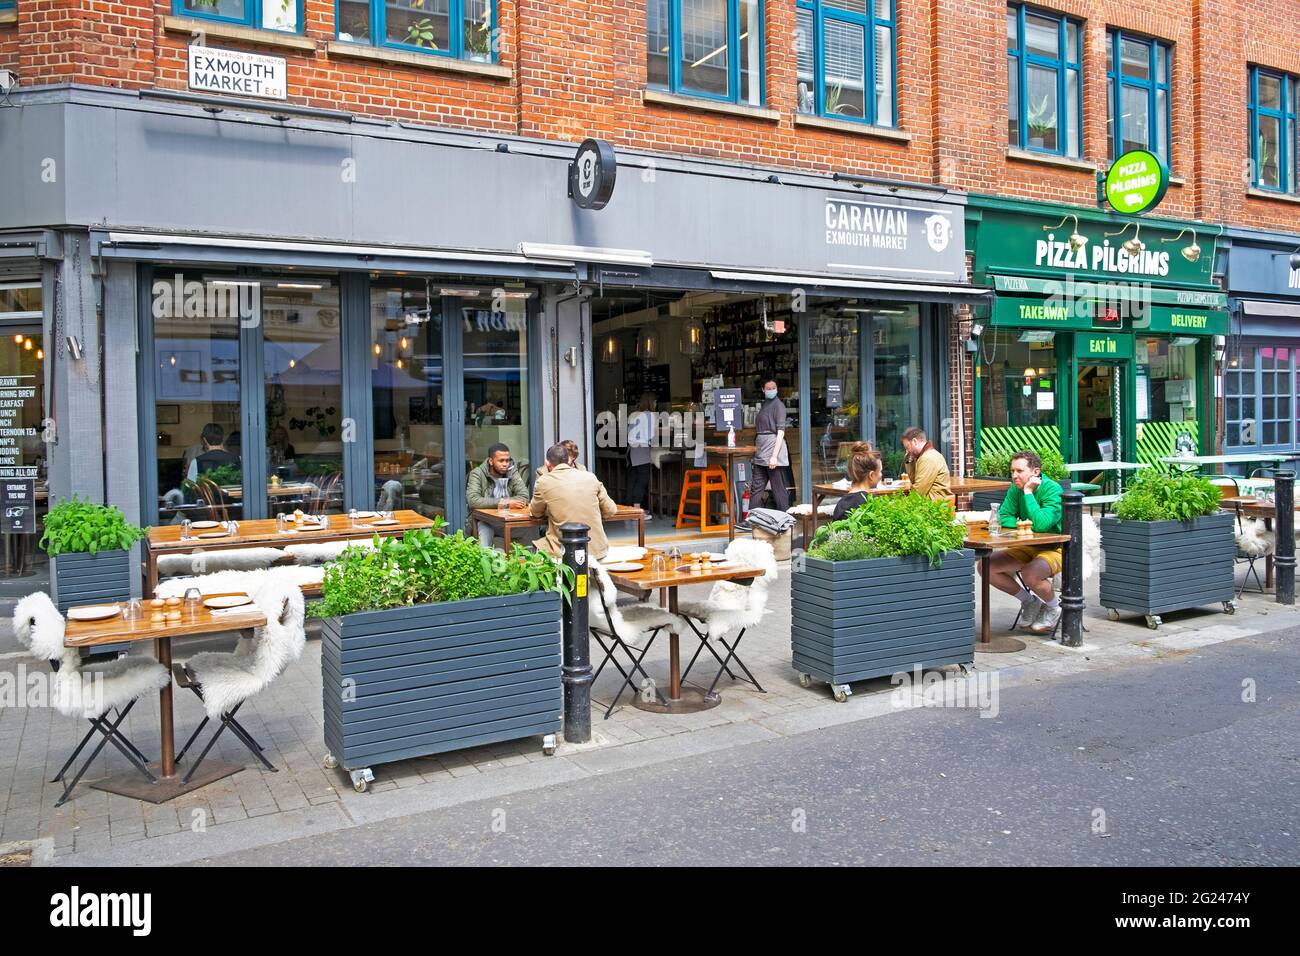 People sitting at tables outside Caravan restaurant at Exmouth Market street in Clerkenwell social distancing in London EC1 England UK  KATHY DEWITT Stock Photo